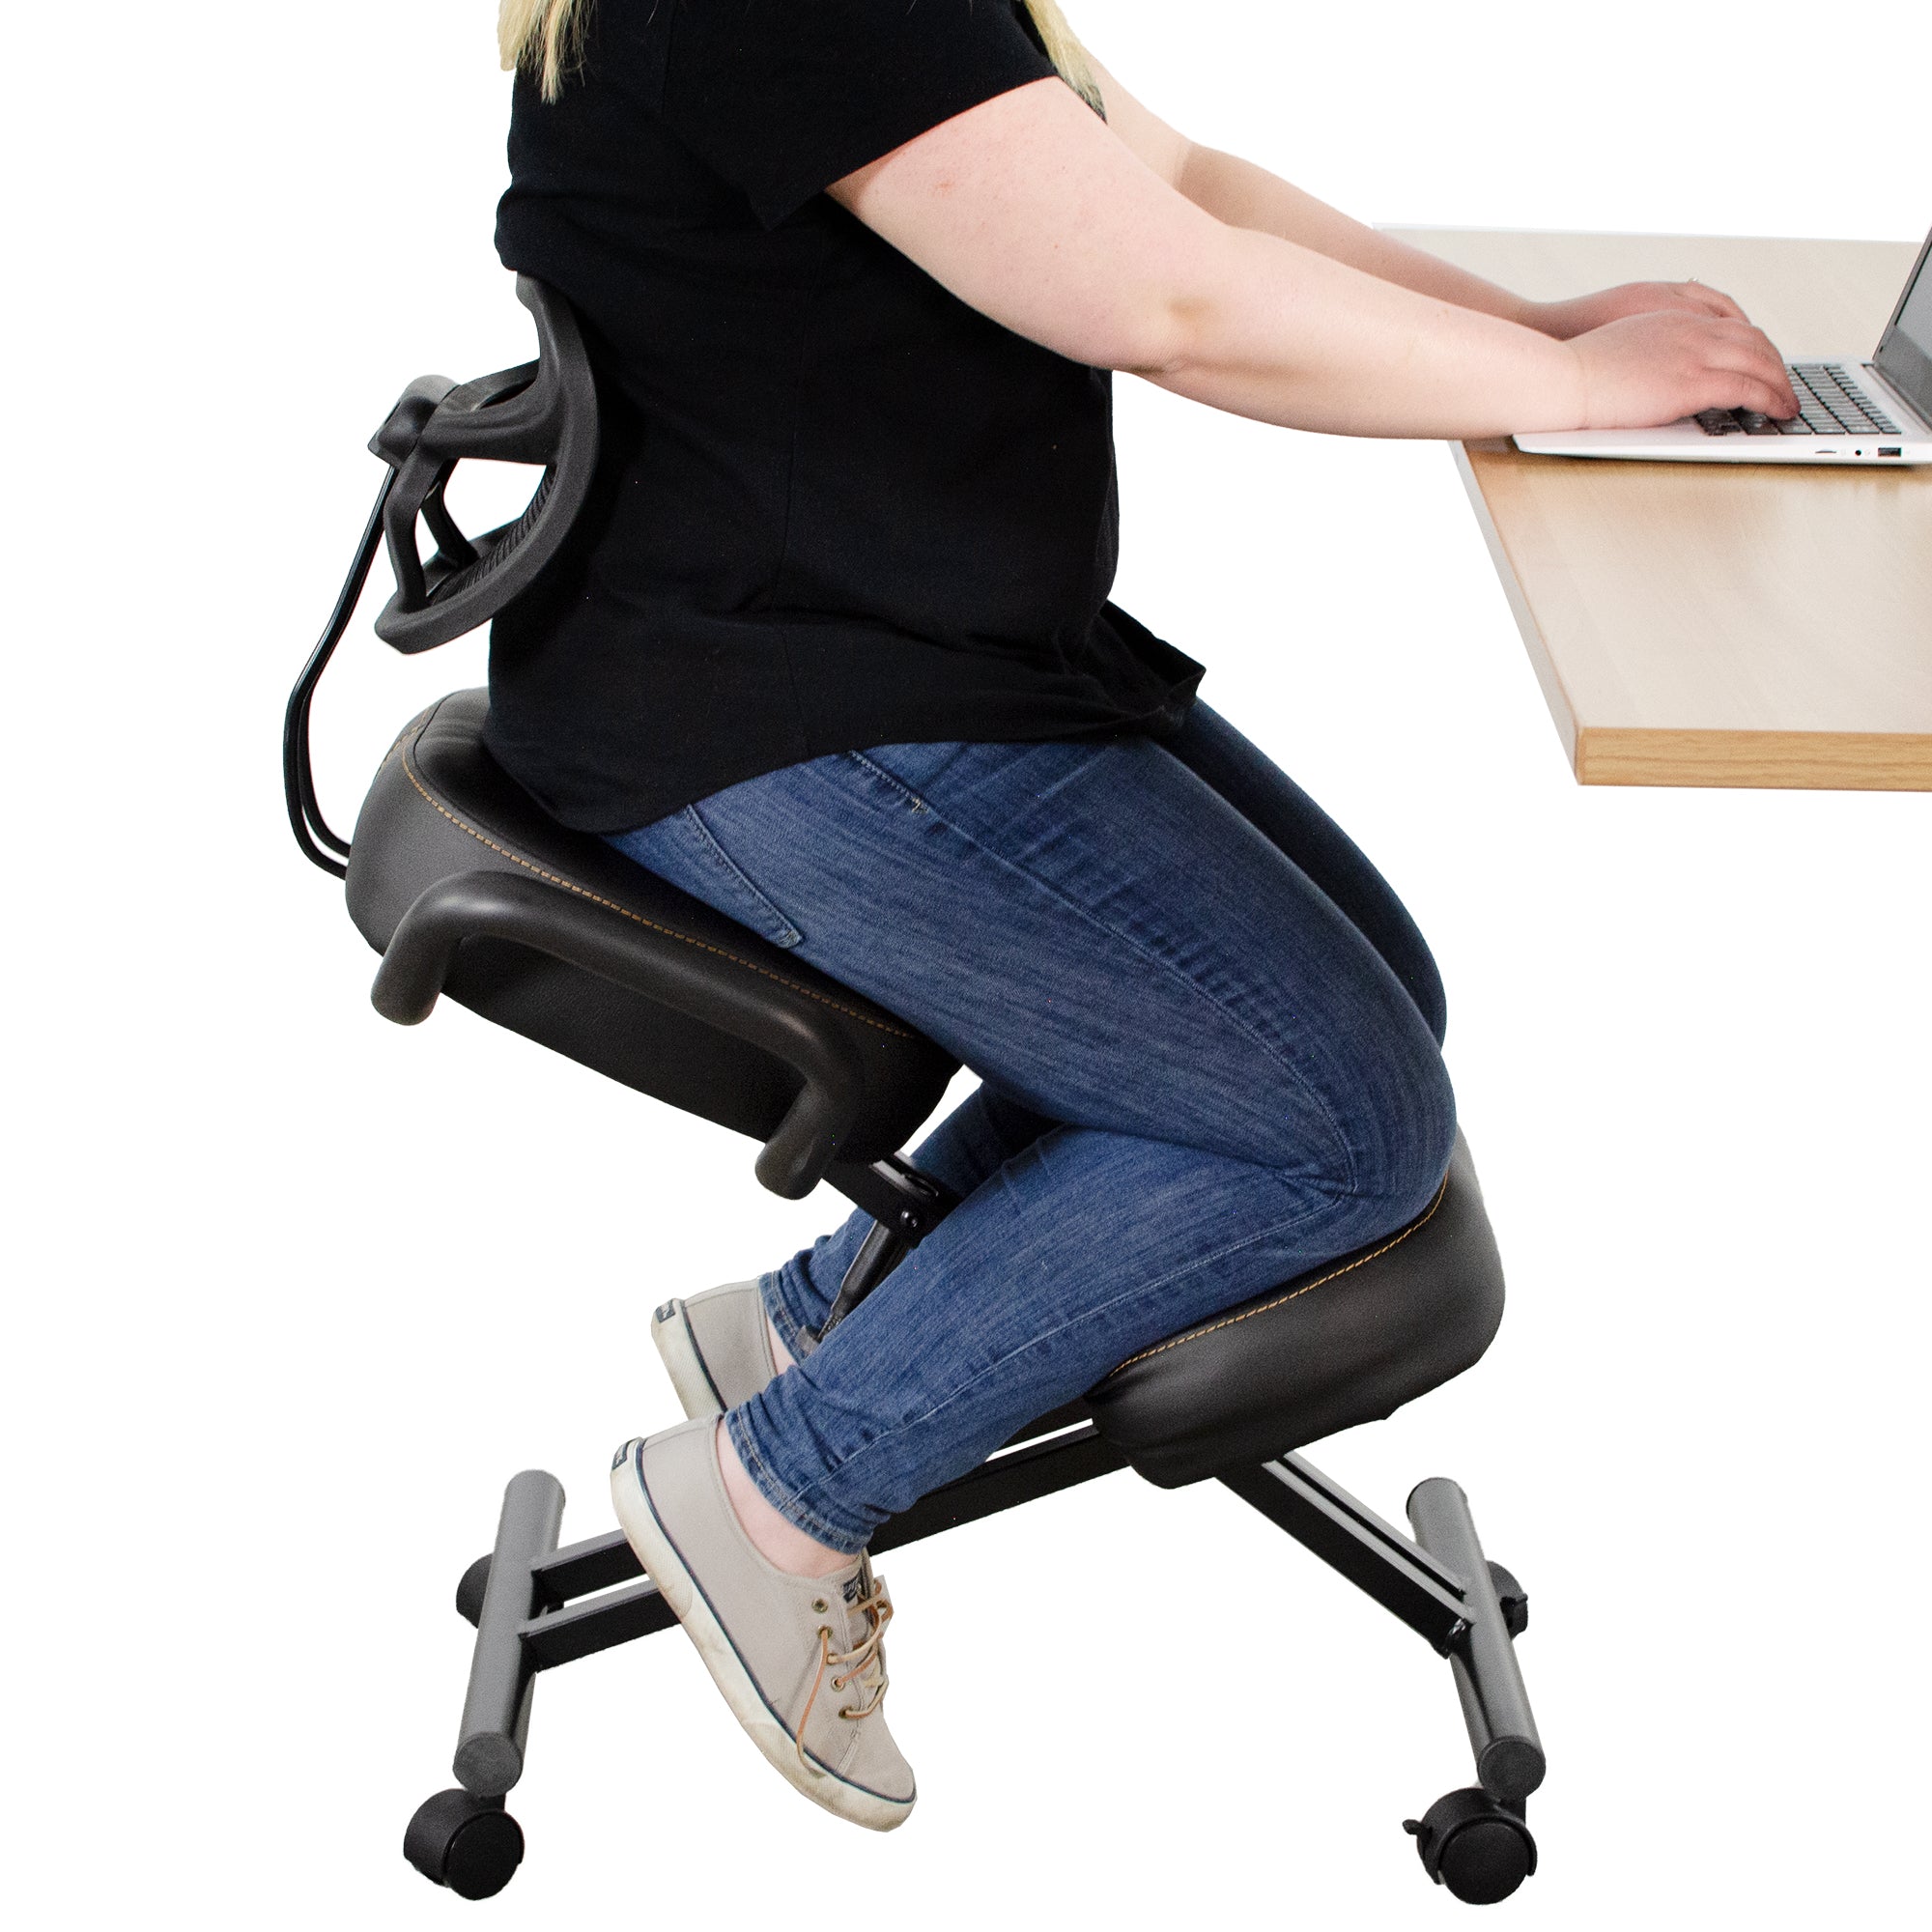 Ergonomic Kneeling Chair Home Office Chairs Thick Cushion Pad Flexible  Seating Rolling Adjustable Work Desk Stool Improve Posture Now Neck Pain 